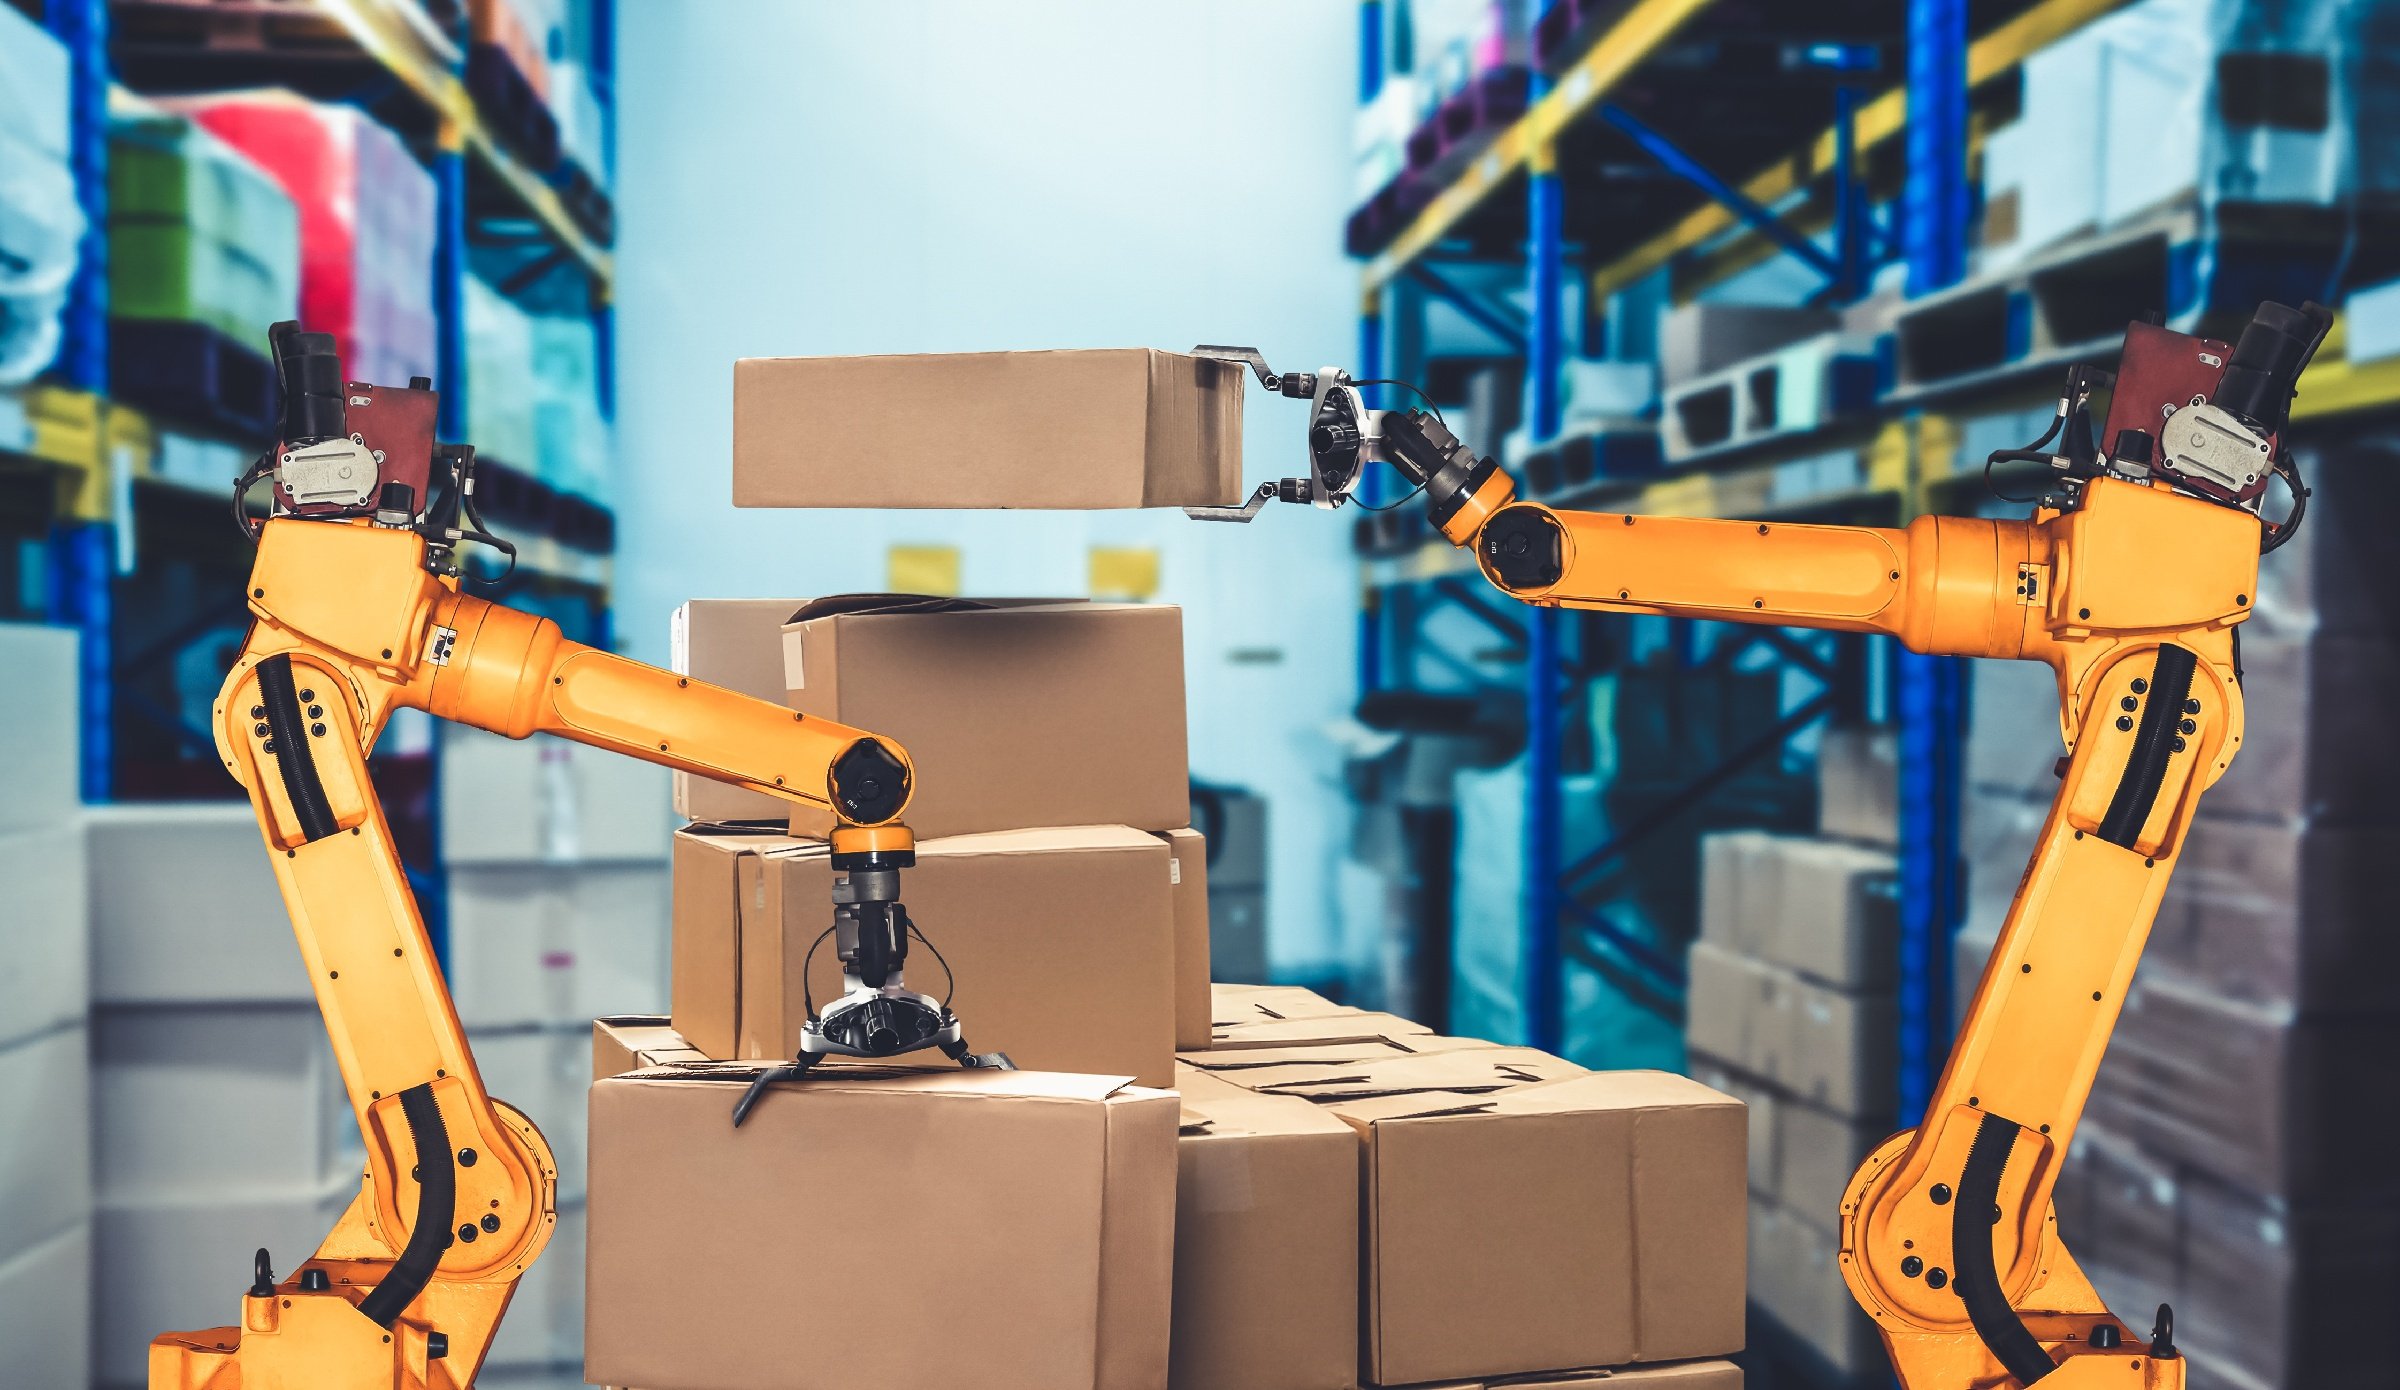 Two robot arms are working together in a warehouse after a successful WMS implementation